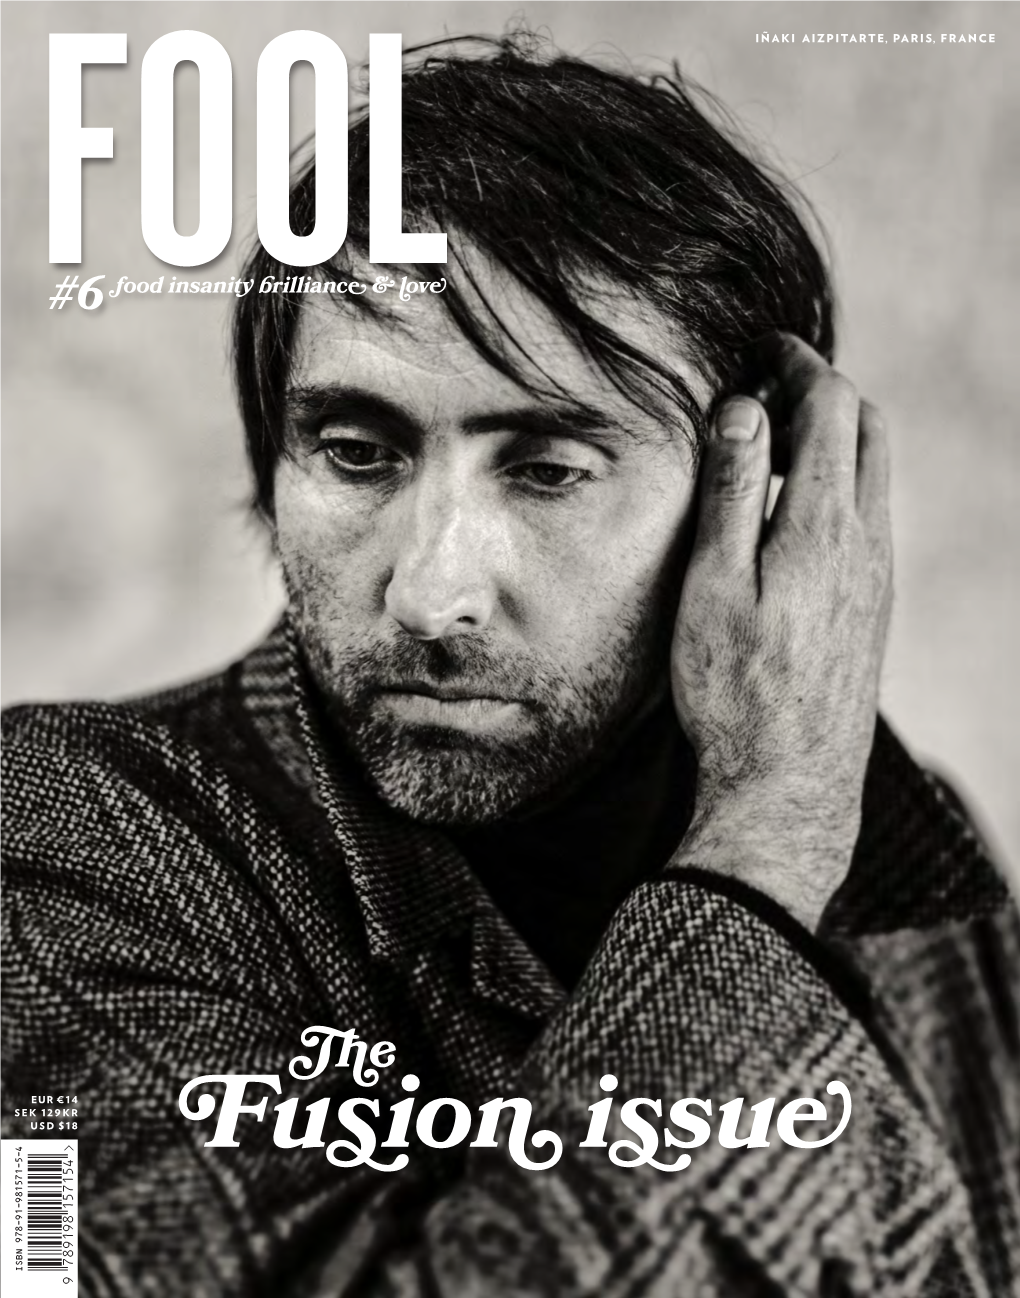 Fusion Issue Protected by International Copyright Law @Fool Magazine